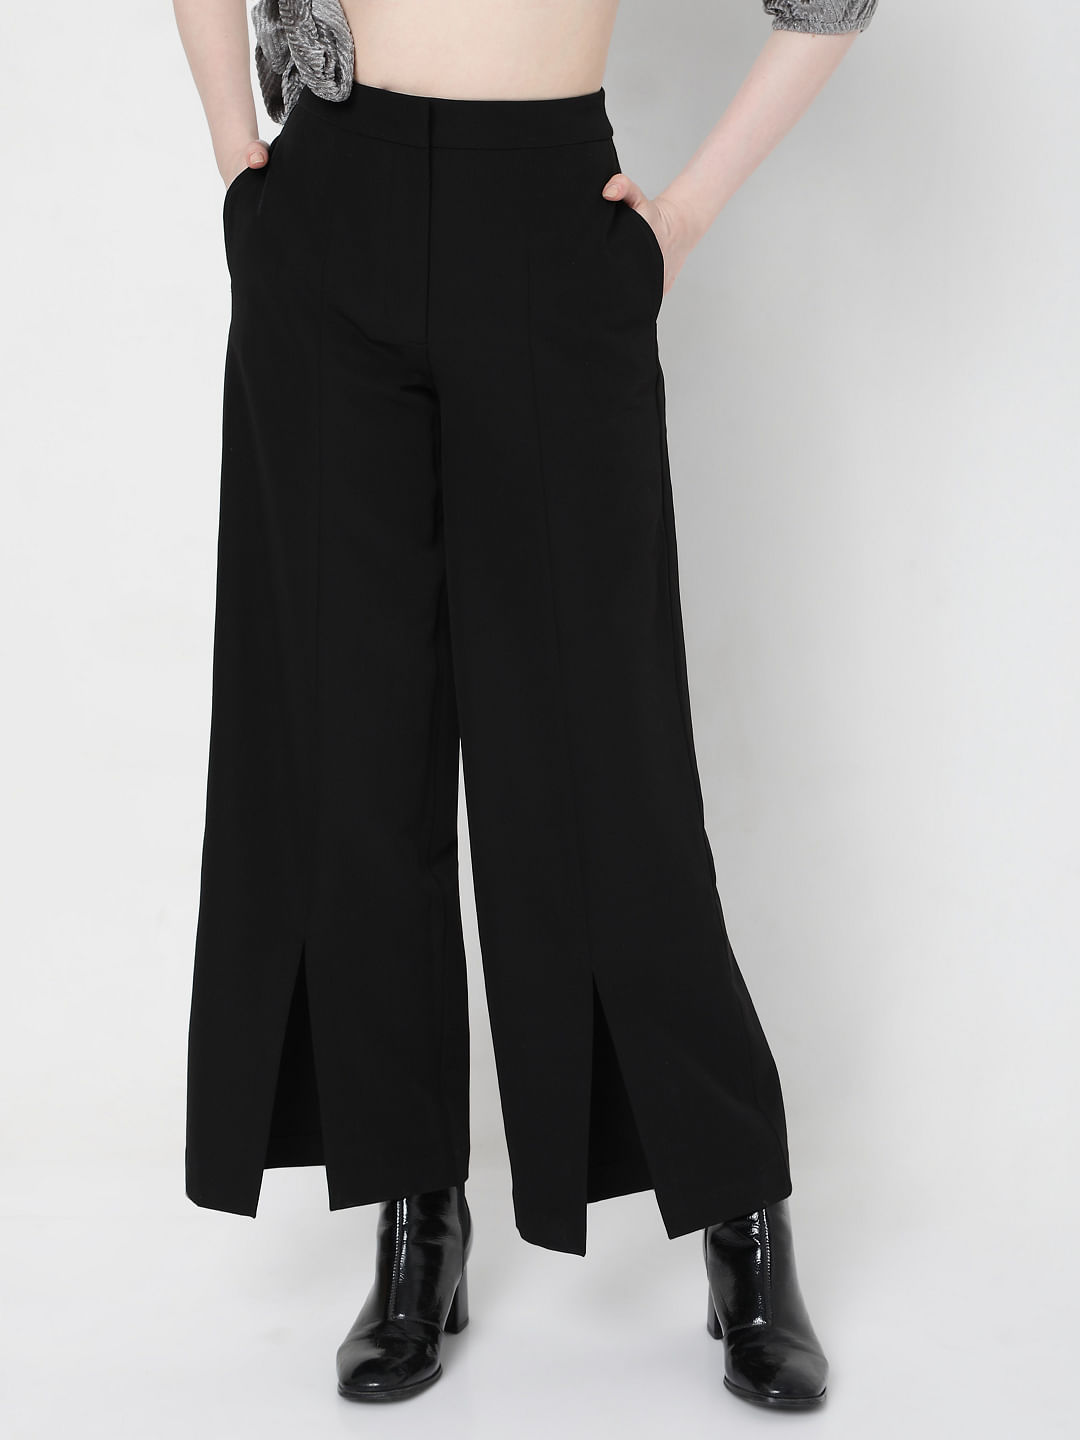 Black Trouser In Lycra With One SIde Cut Out Waist  Styched Fashion